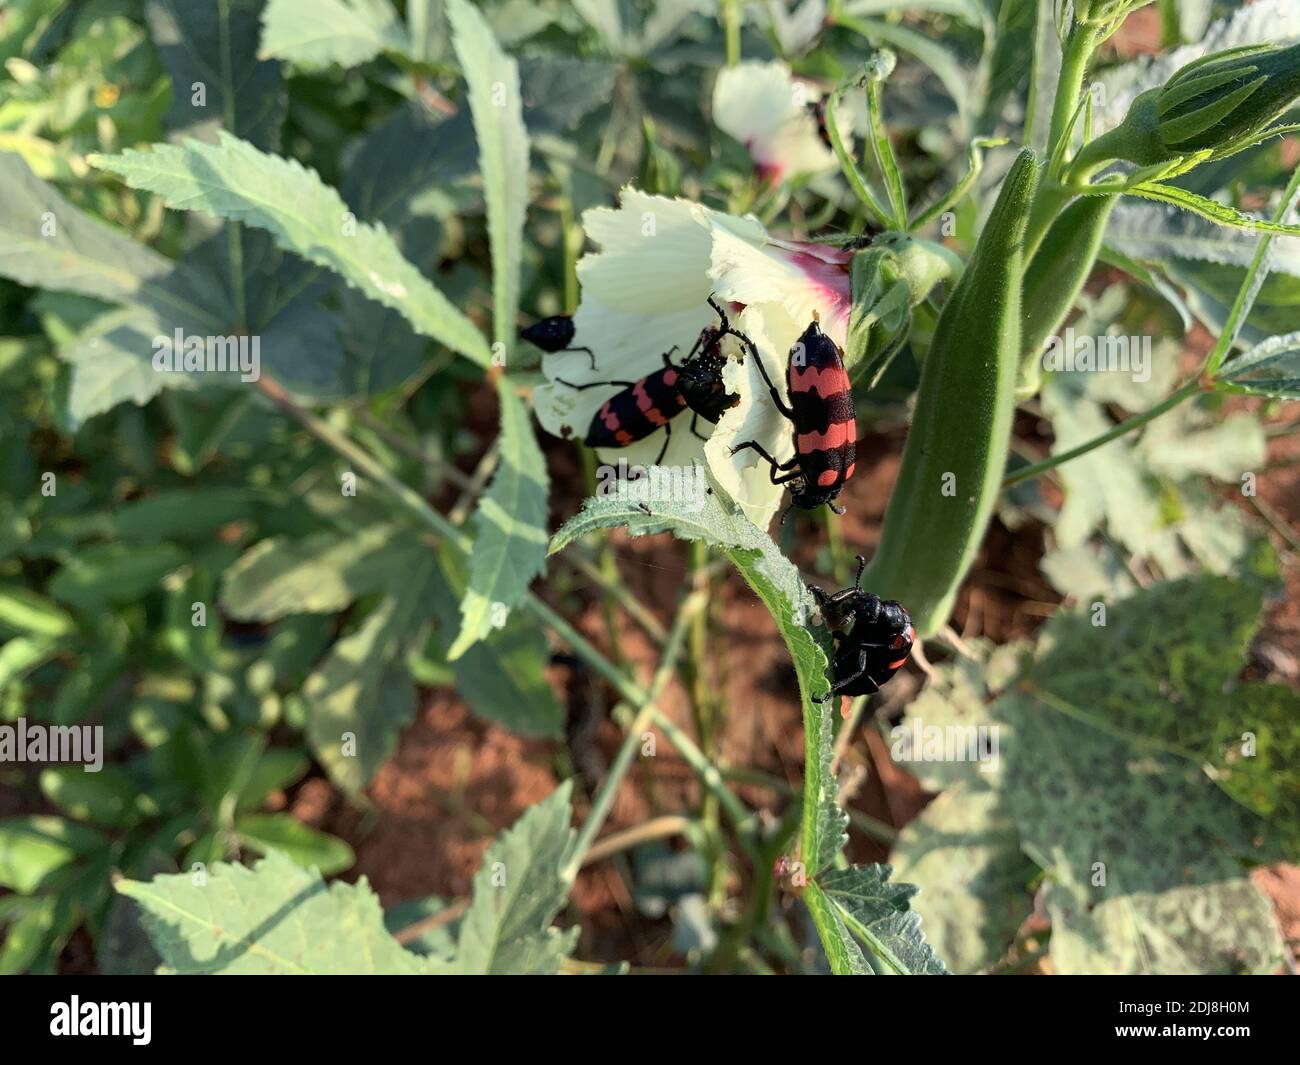 A closeup of hycleus bugs on a hibiscus calyphyllus in a garden under the sunlight Stock Photo